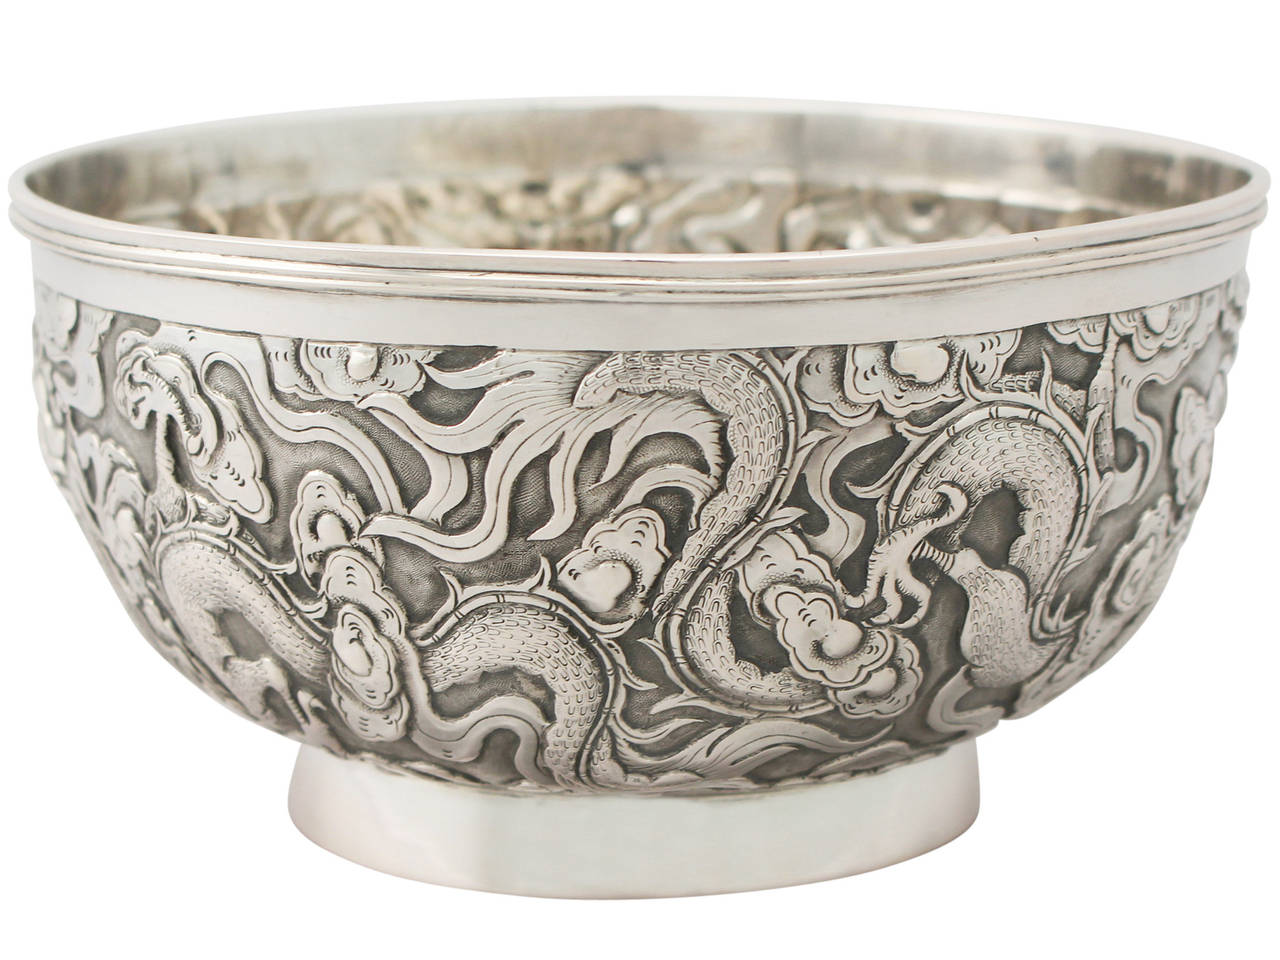 A fine antique Chinese Export Silver bowl; part of our Chinese/Asian silverware collection

This fine Chinese Export Silver (CES) bowl has a plain circular form onto a collet foot.

The body of this antique bowl is embellished with embossed and